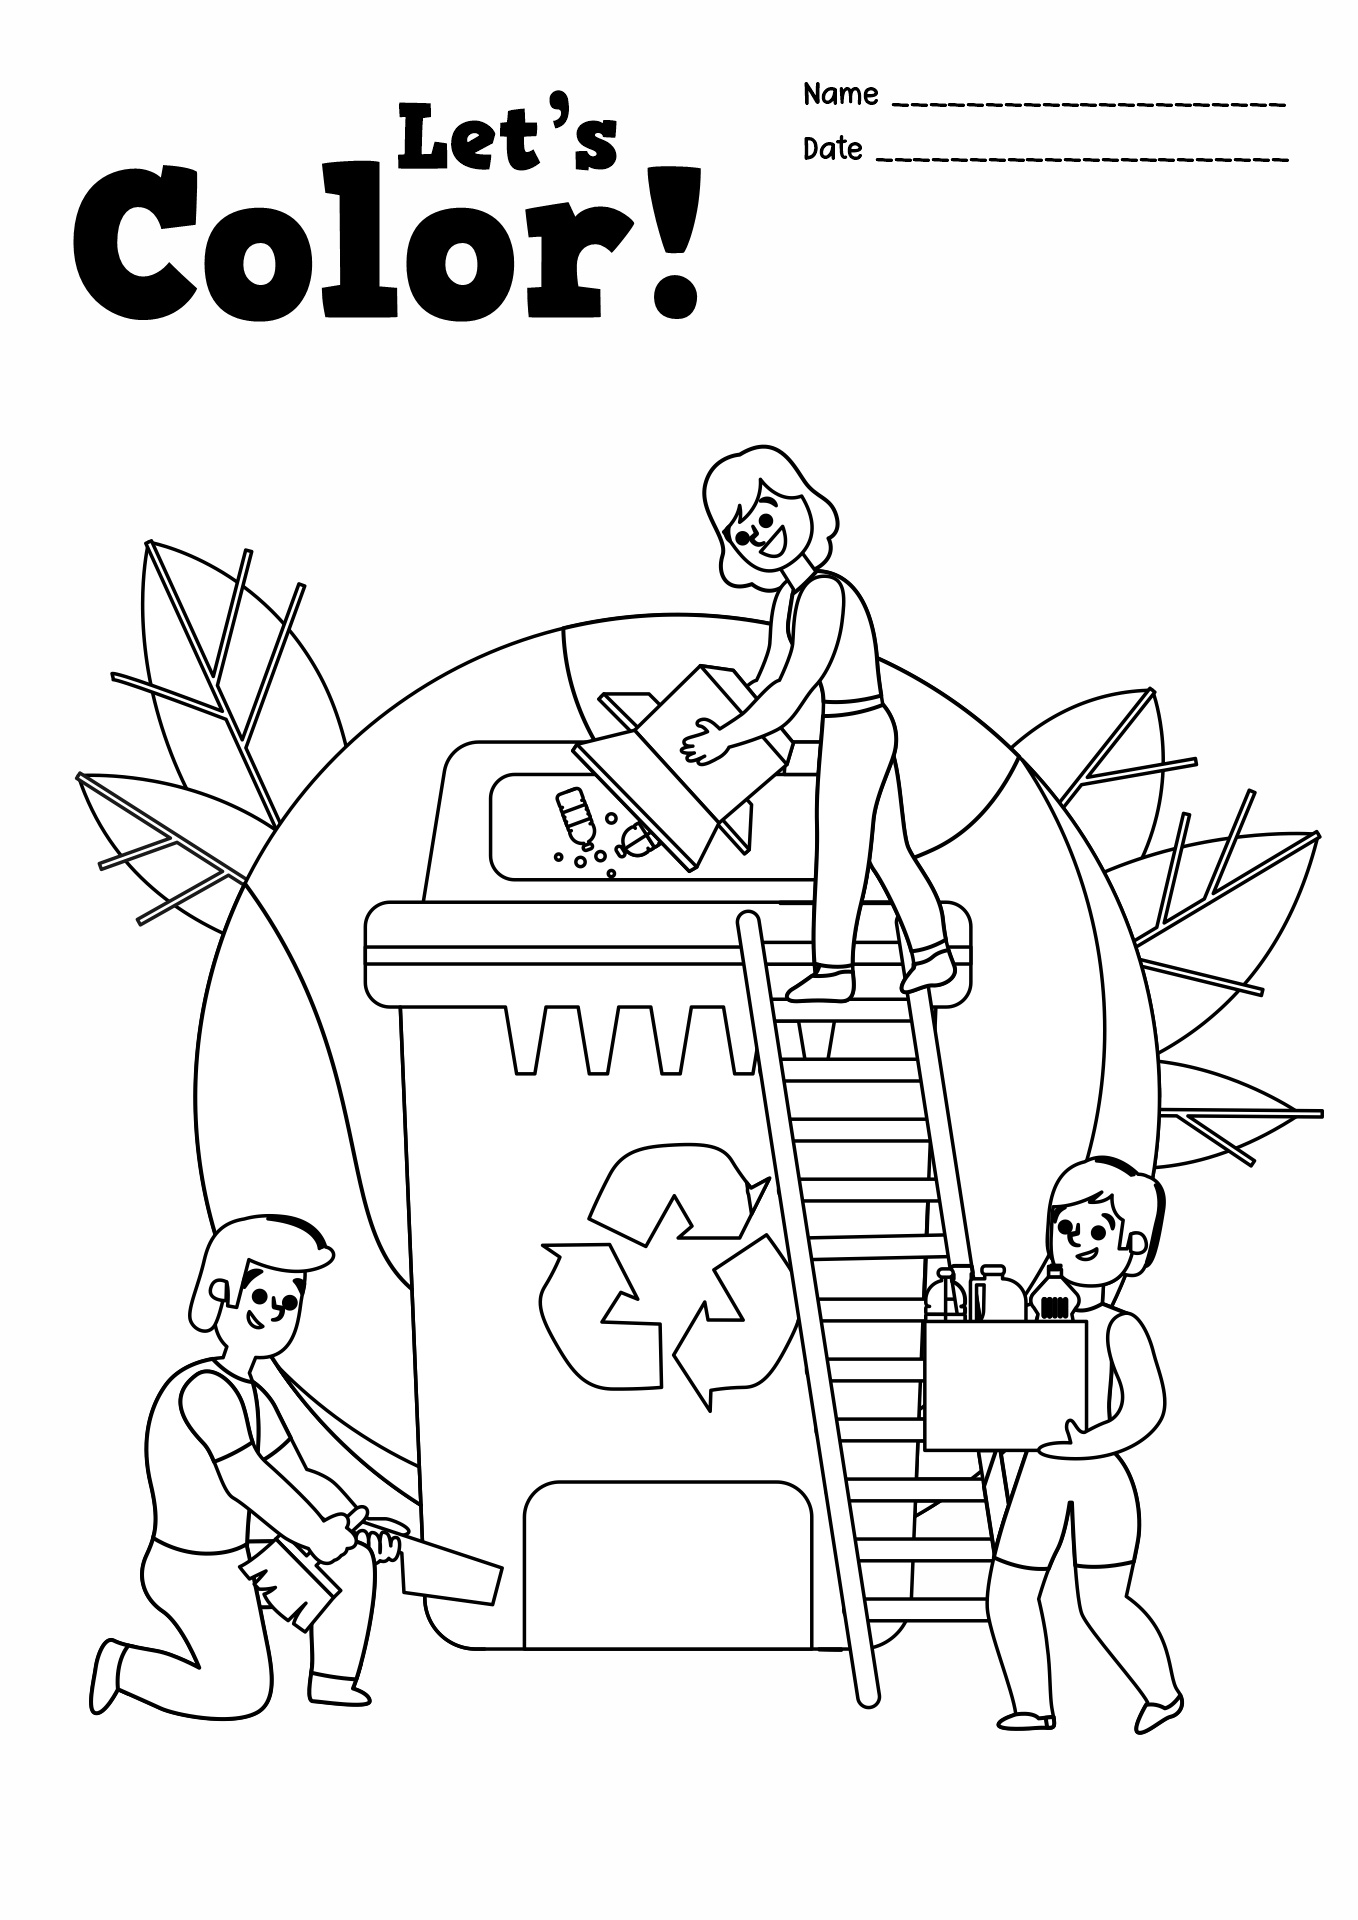 Recycling Coloring Activity Pages Image